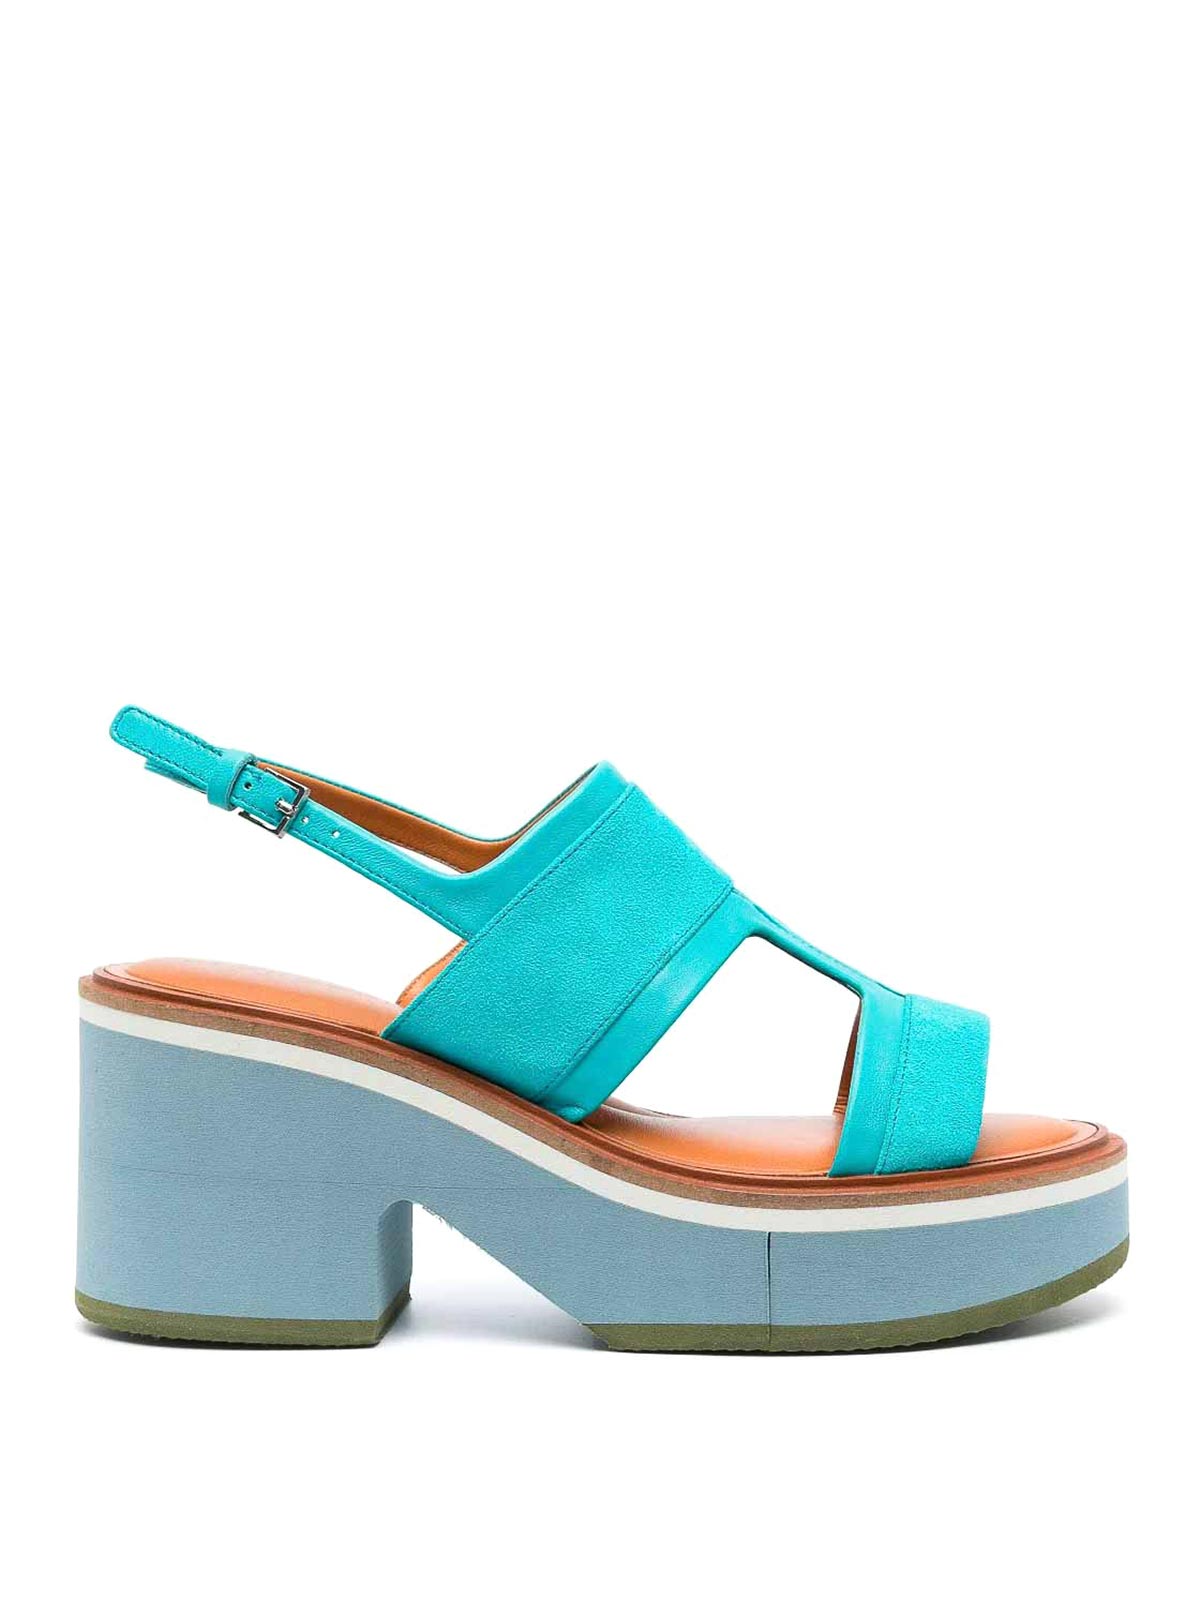 Robert Clergerie Clelie Slingback Strapped Sandals In Blue